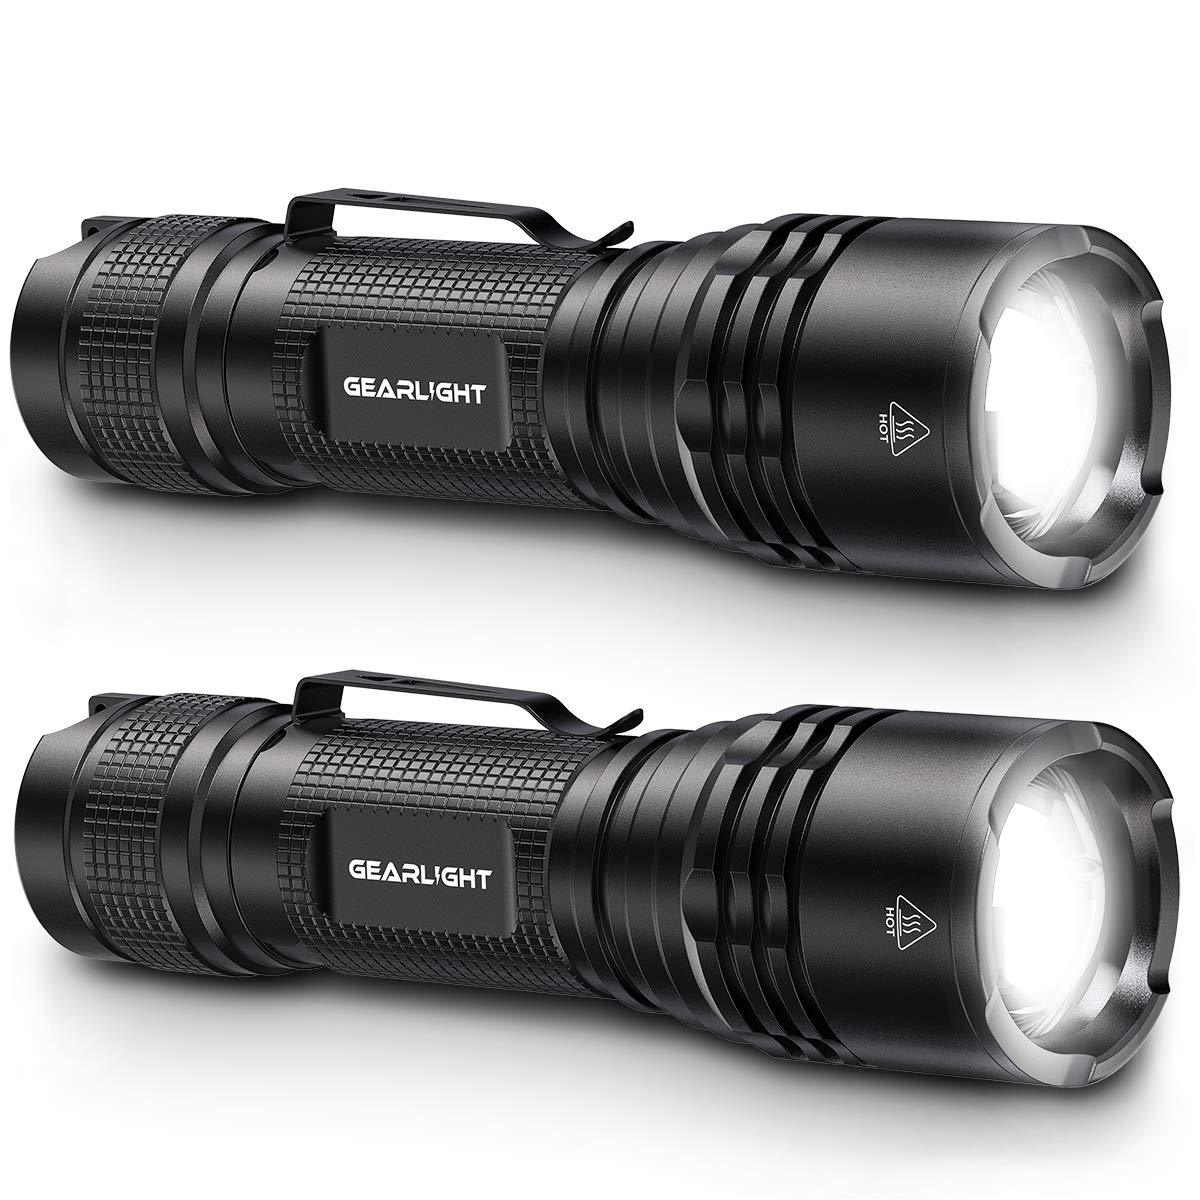 GearLight TAC LED Tactical Flashlight [2 PACK] - Single Mode, High Lumen, Zoomable, Water Resistant, Flash Light - Camping, Outdoor, Emergency, Everyday Flashlights with Clip - image 1 of 7